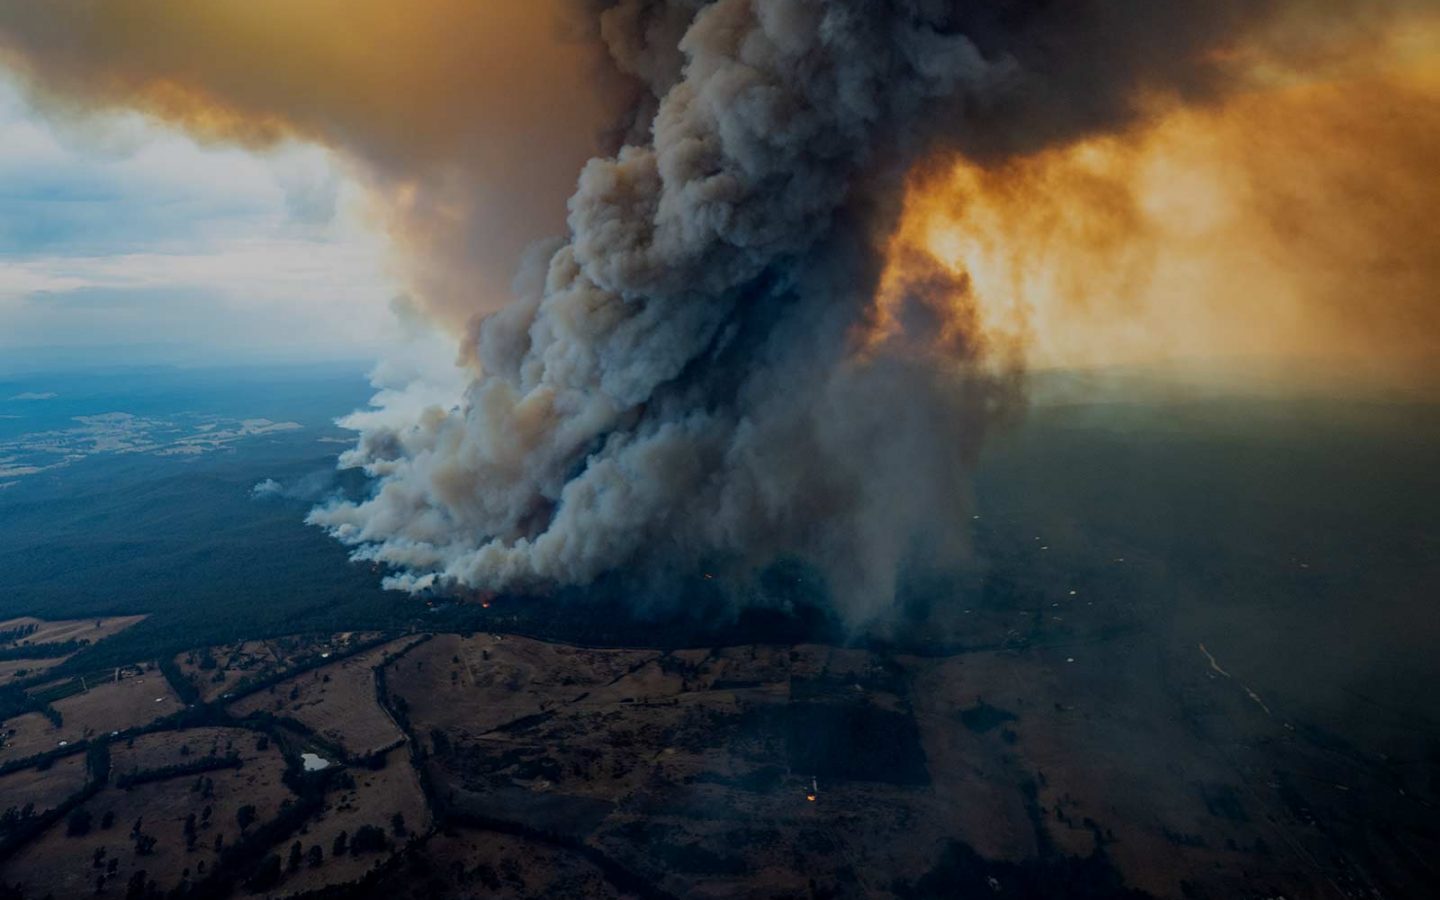 Aerial view of a dark smoke plume rising high above a forest and rural landscape.